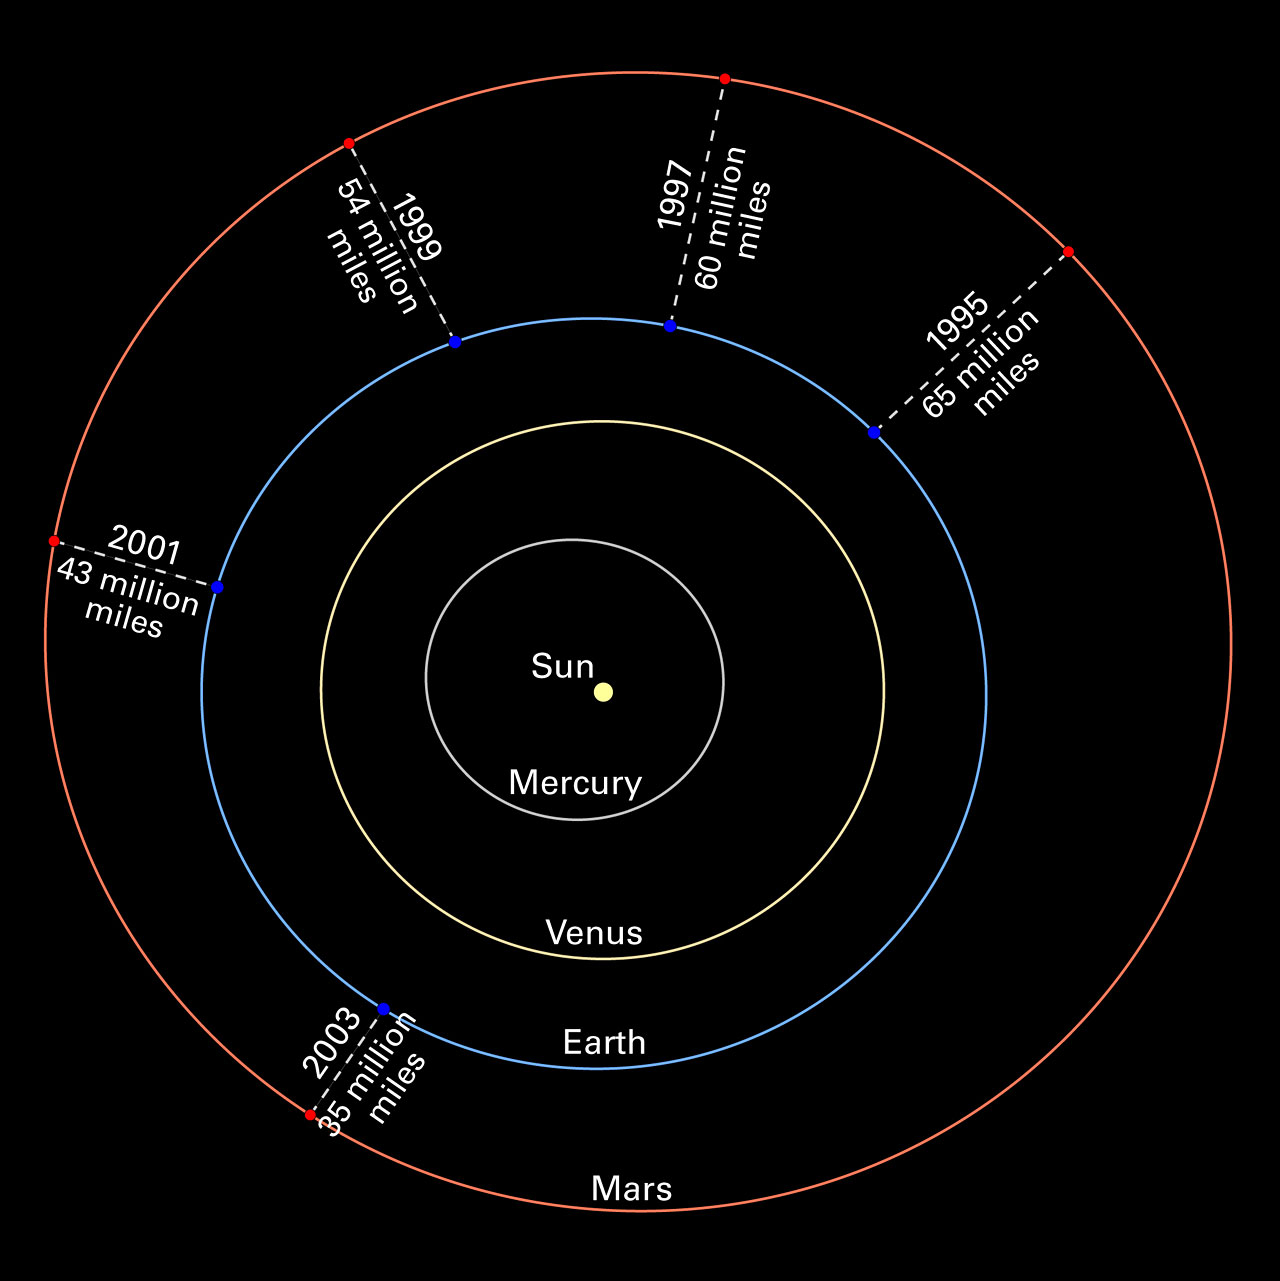 Solar System Diagram Mars Oppositions Solar System Diagram Without Images Esahubble